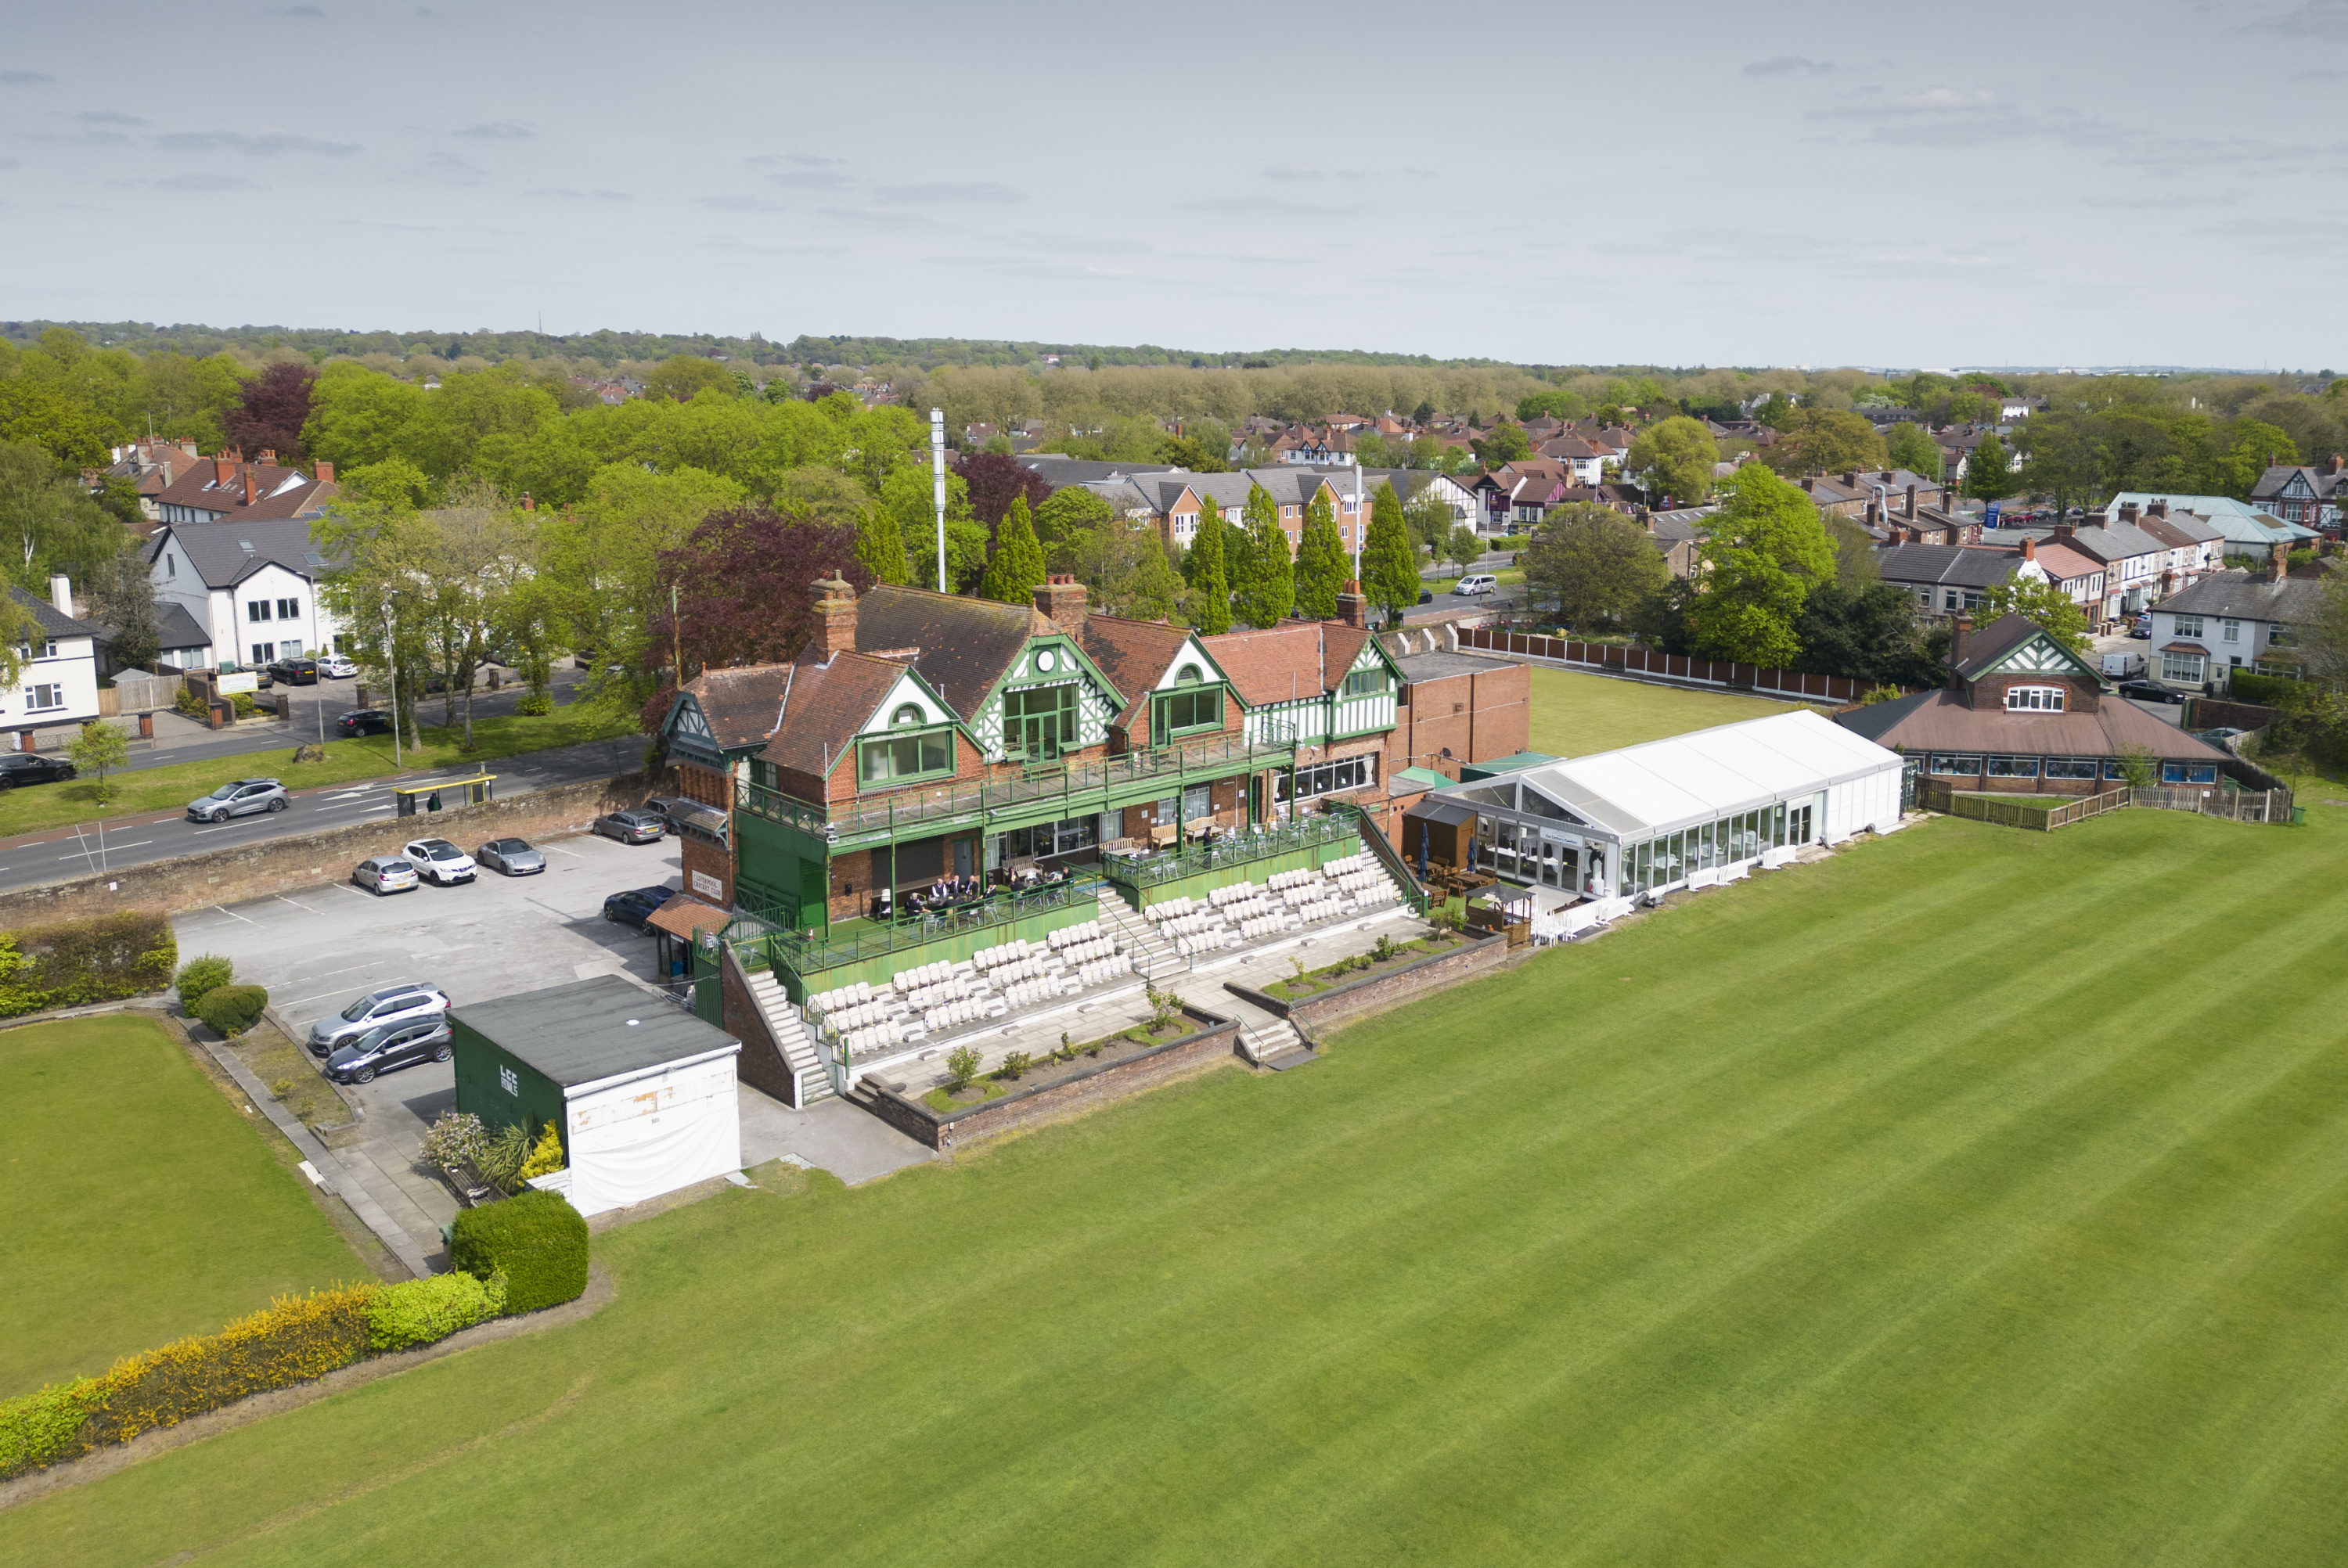 A cricket pavilion and the edge of the cricket pitch as viewed from above